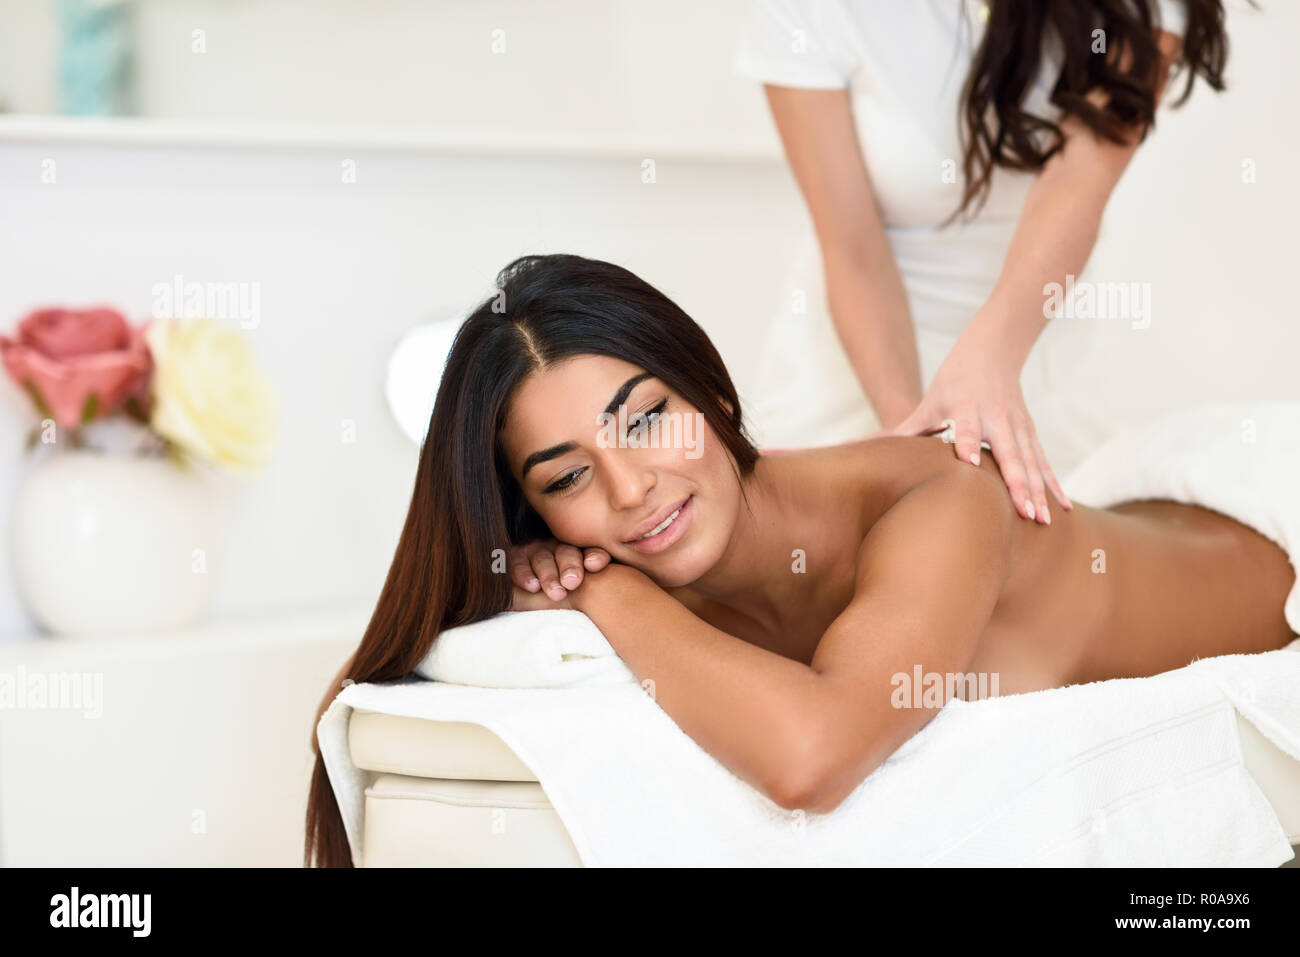 Arab woman receiving back massage in spa wellness center. Beauty and Aesthetic concepts. Stock Photo